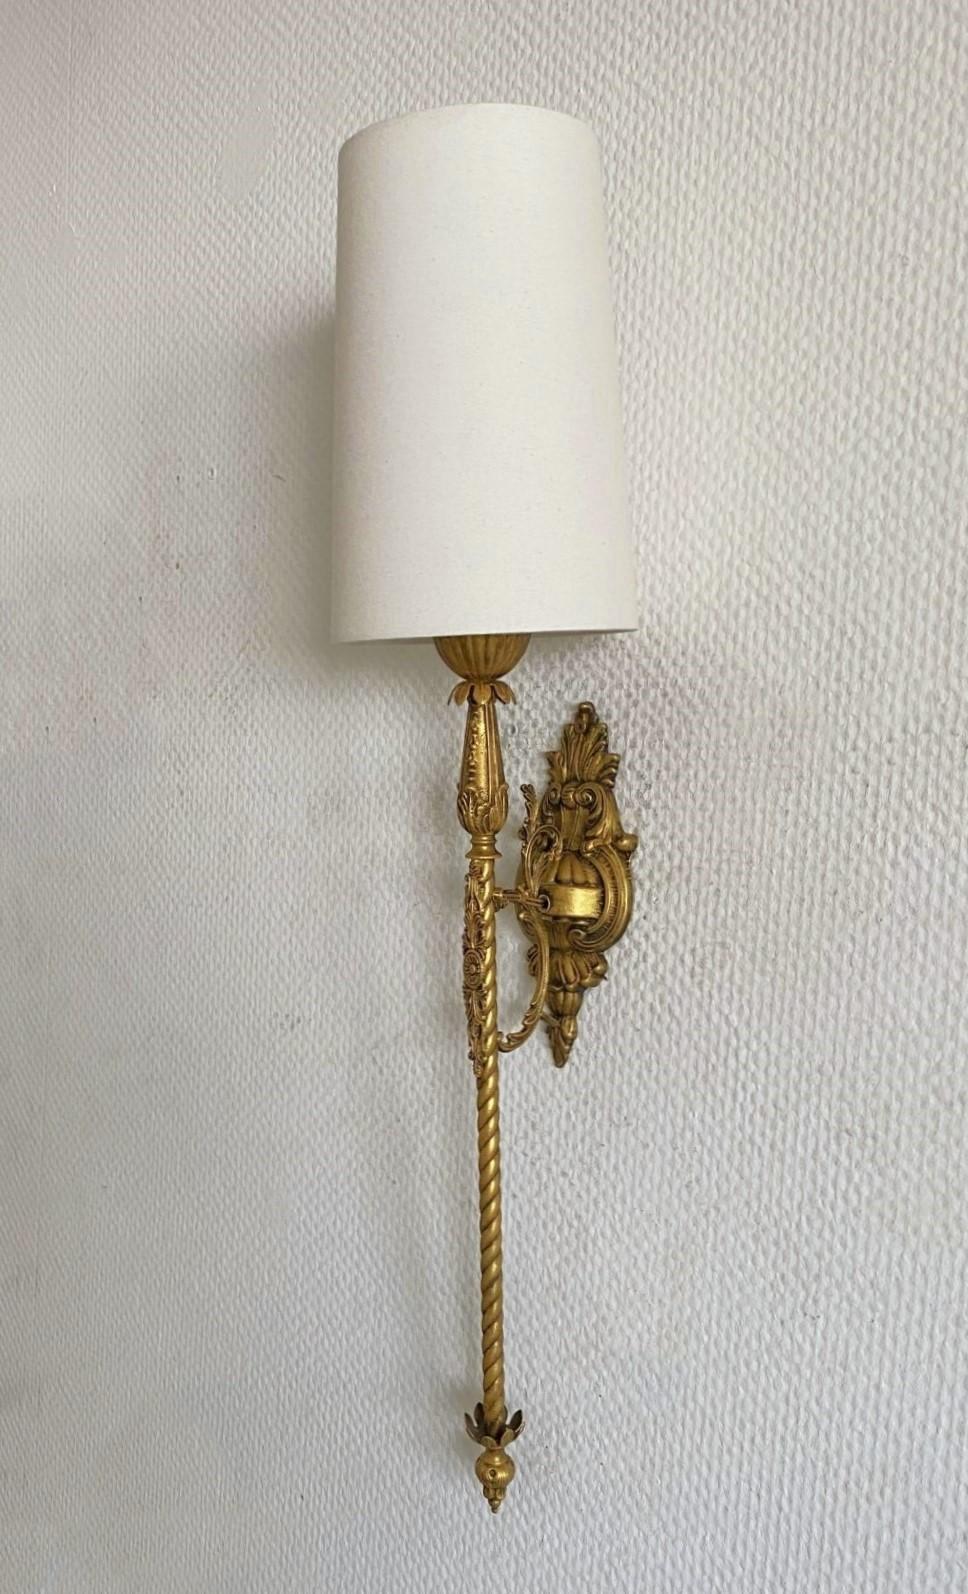 Pair of French Tall Art Deco Bronze Torchiere Wall Sconces, 1930s For Sale 2